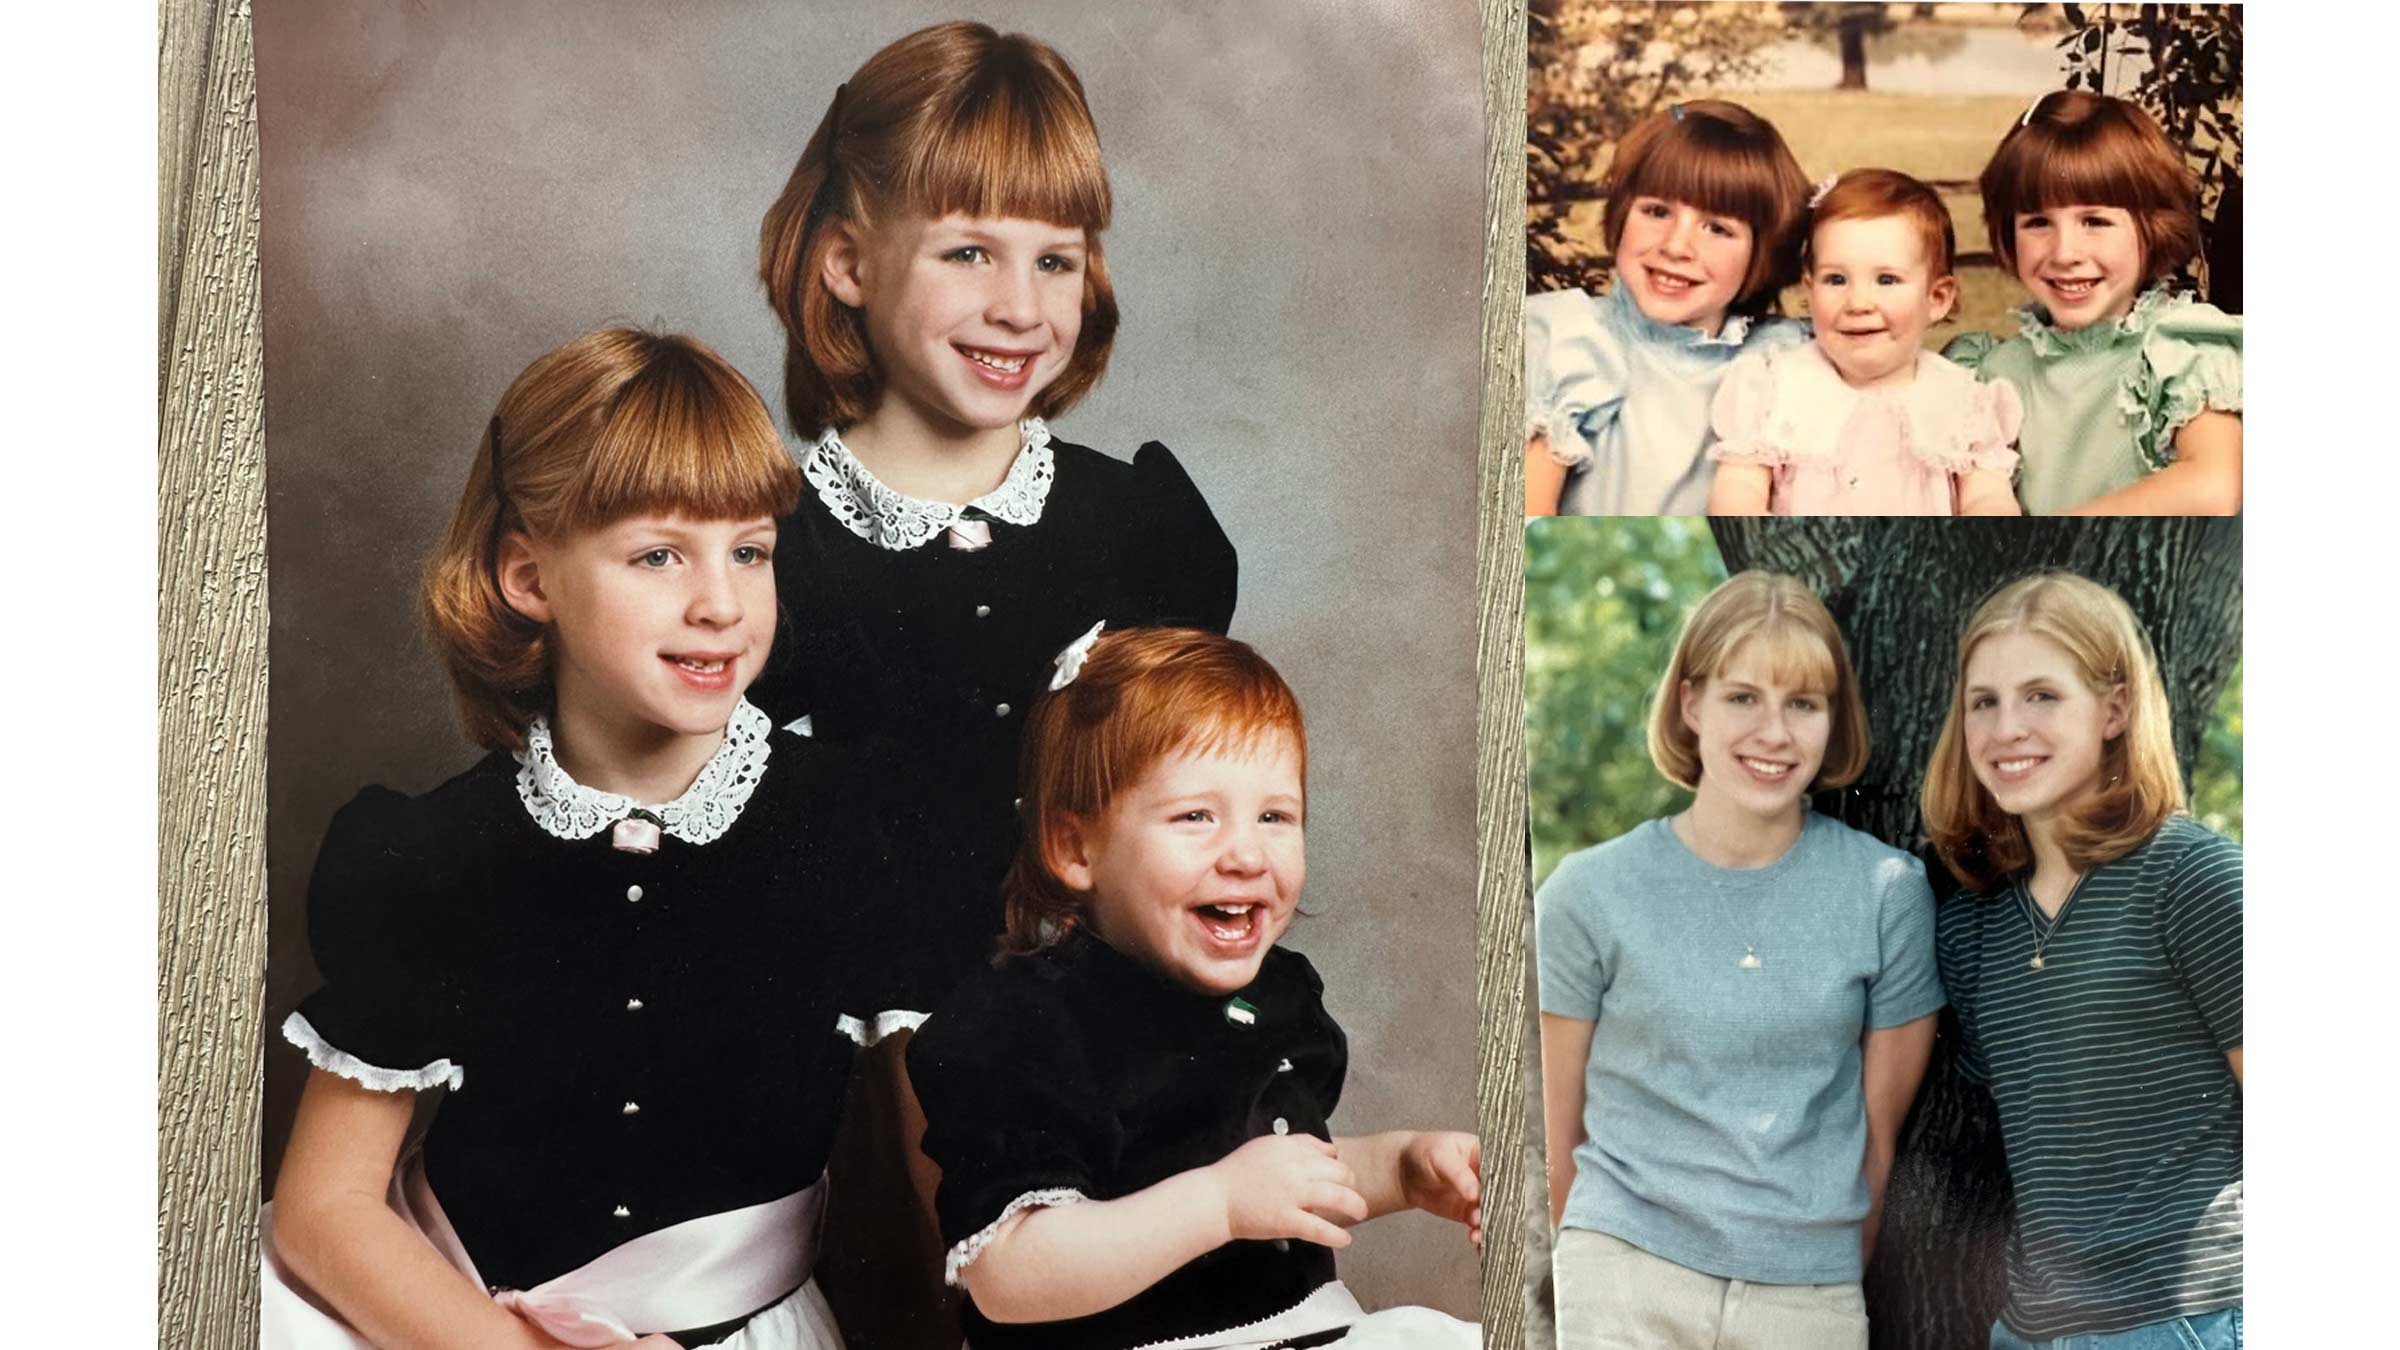 Photos of the sisters as they were growing up.